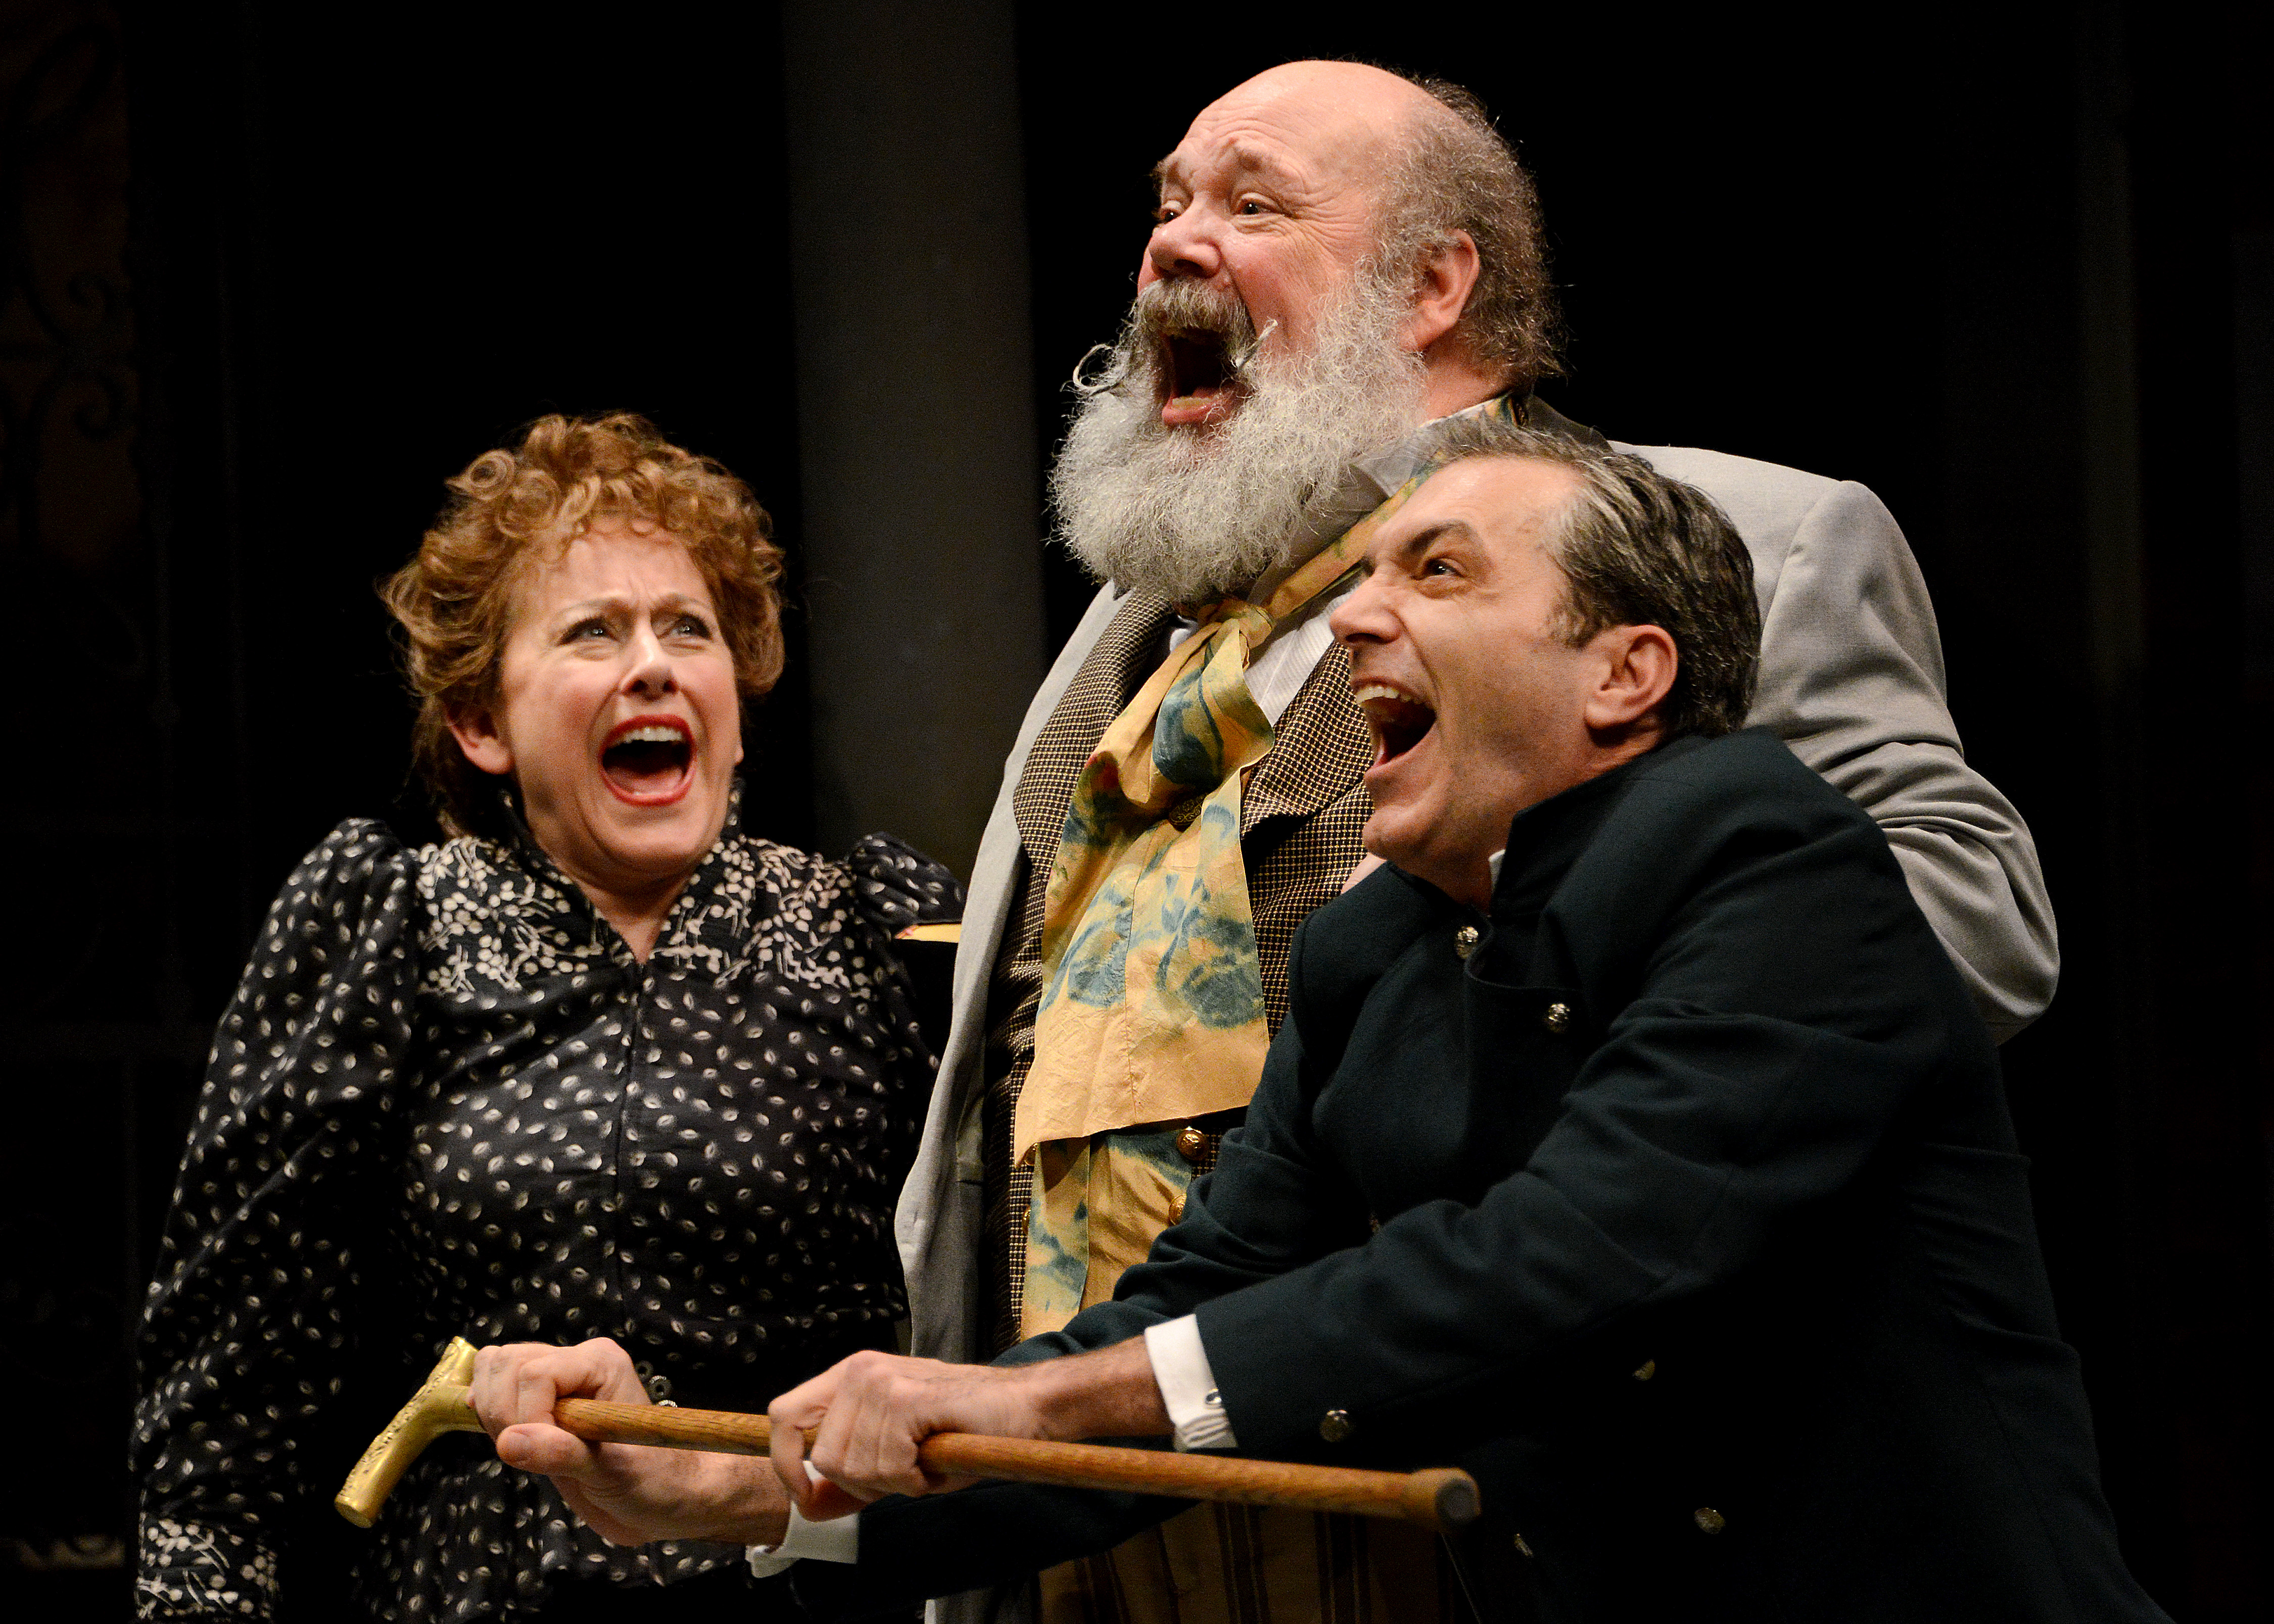 Egad, what a lineup! Though appearing to exult over the rich variety of shows available in live theater during February, these actors (Helena Ruoti, John Ahlin, and Tony Bingham) are performing in Shakespeare's 'Twelfth Night' at The Public.